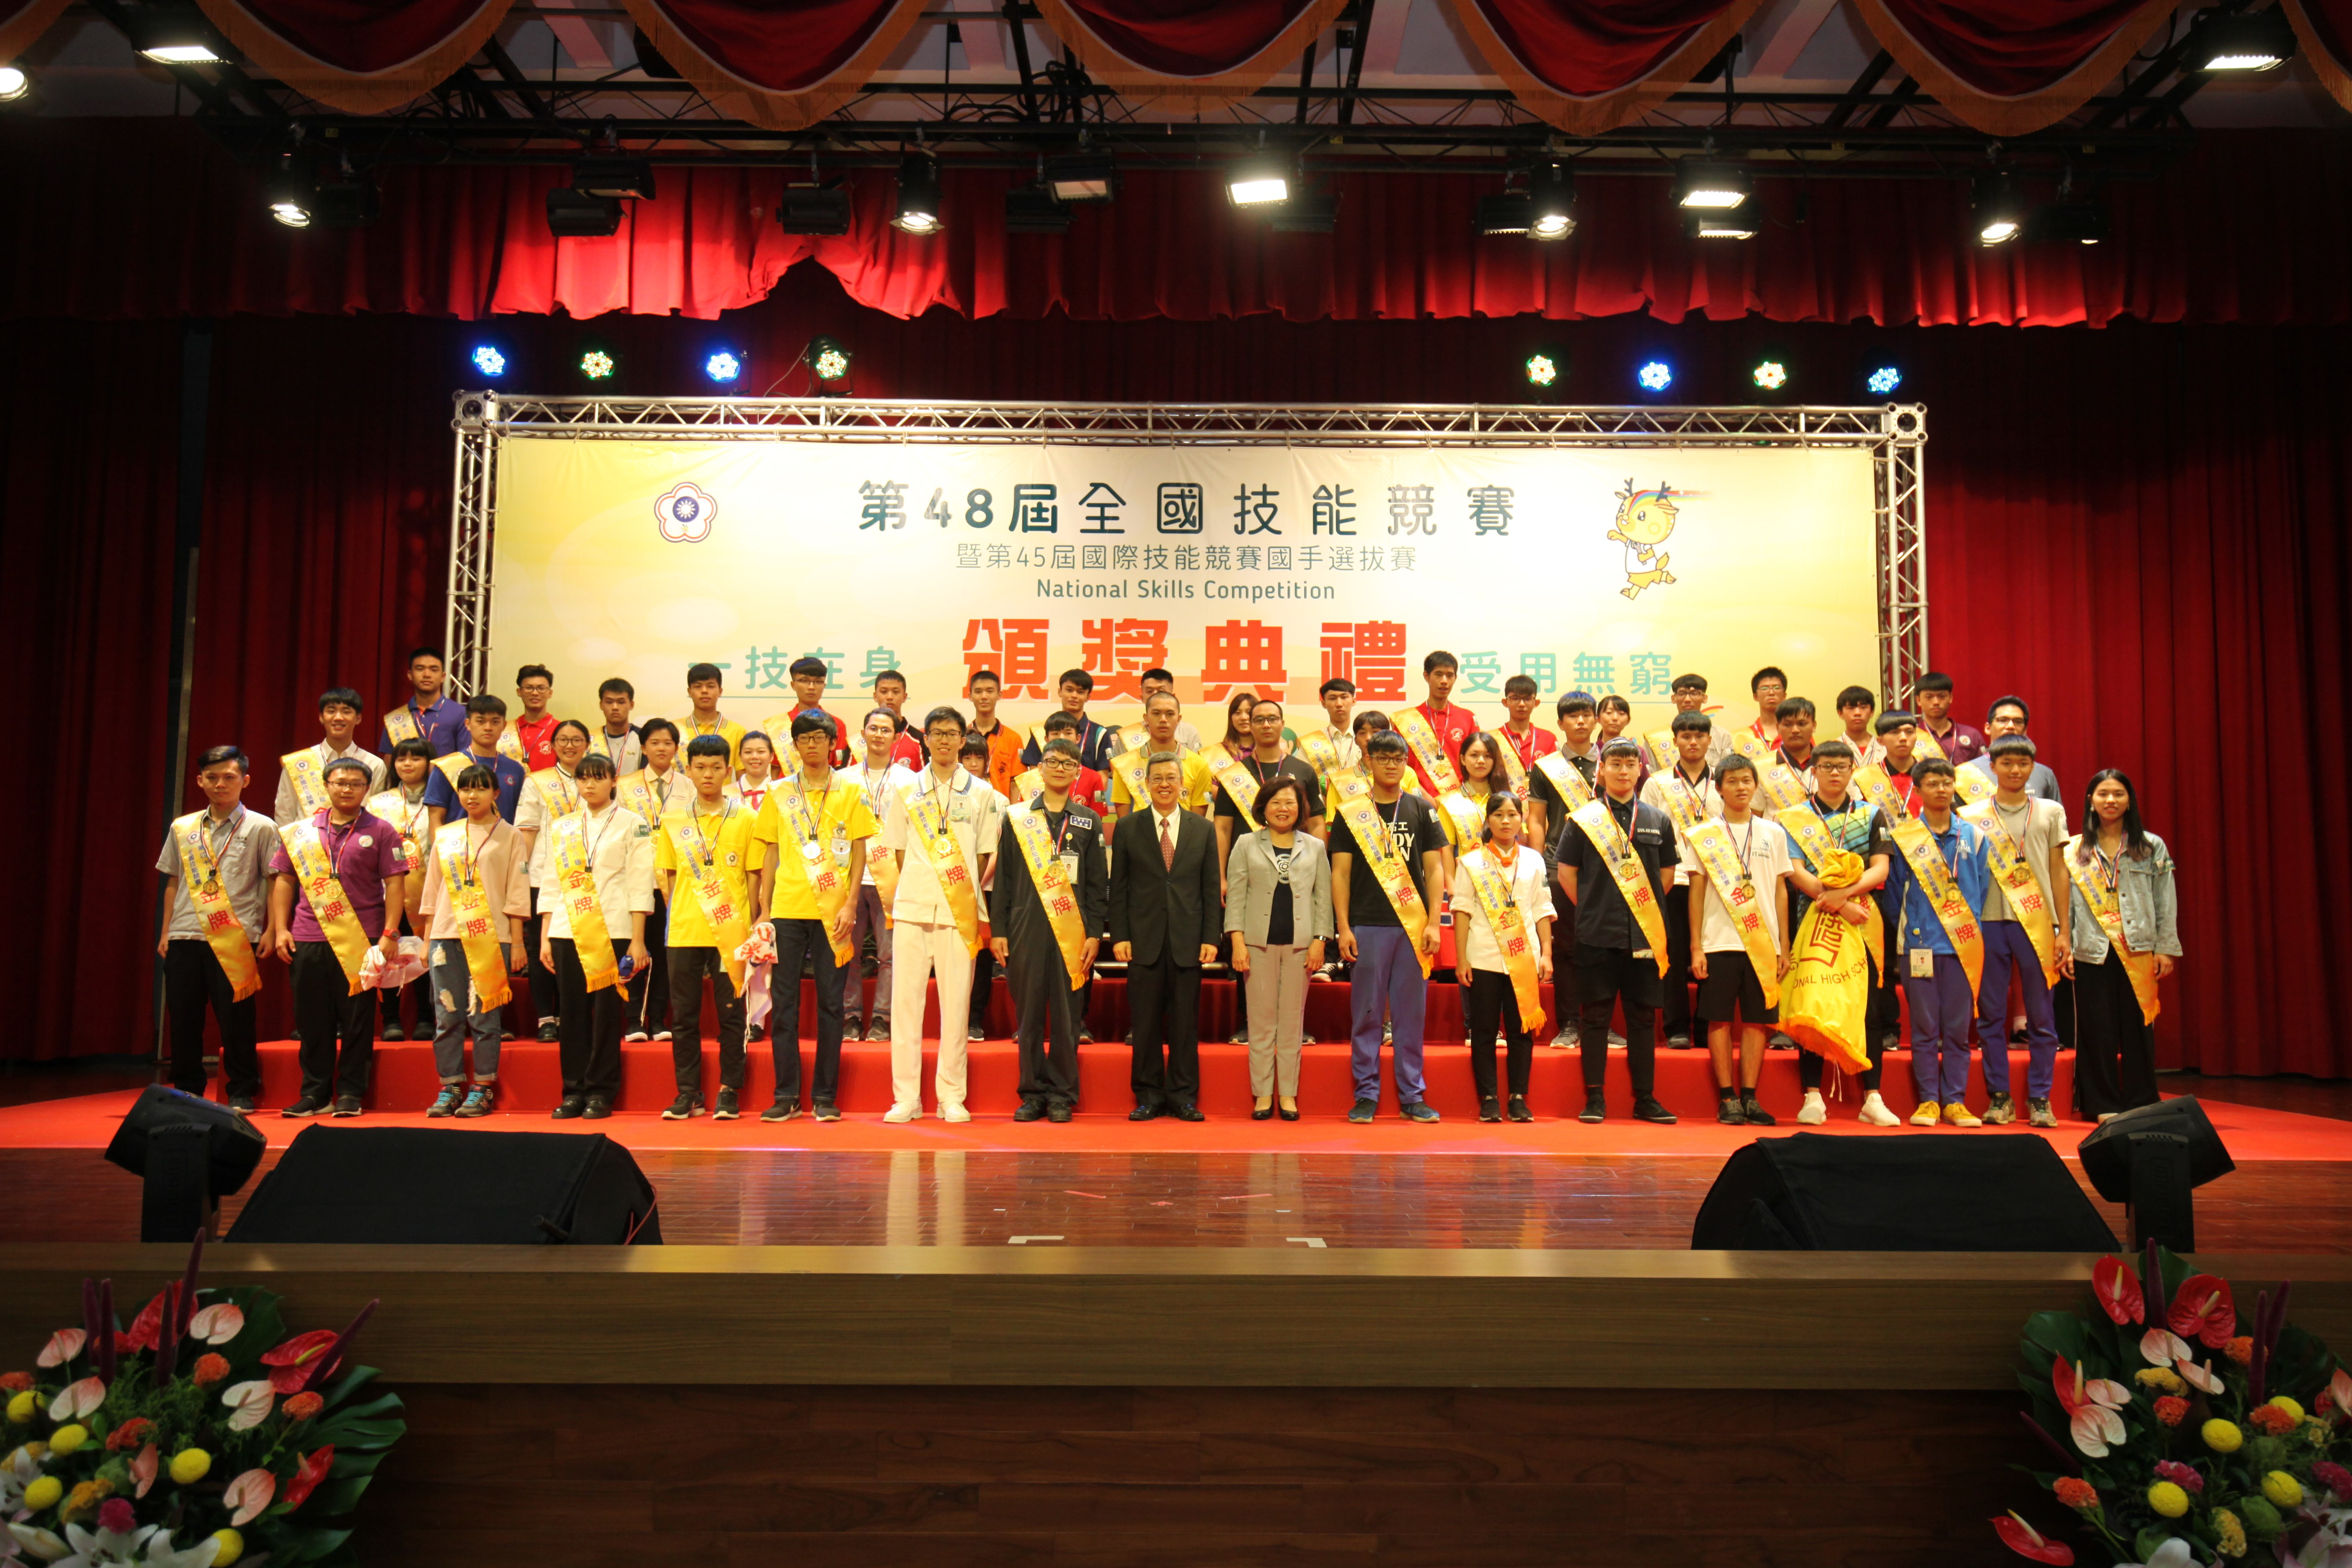 Awarding Ceremony in the 47th National Skills Competition